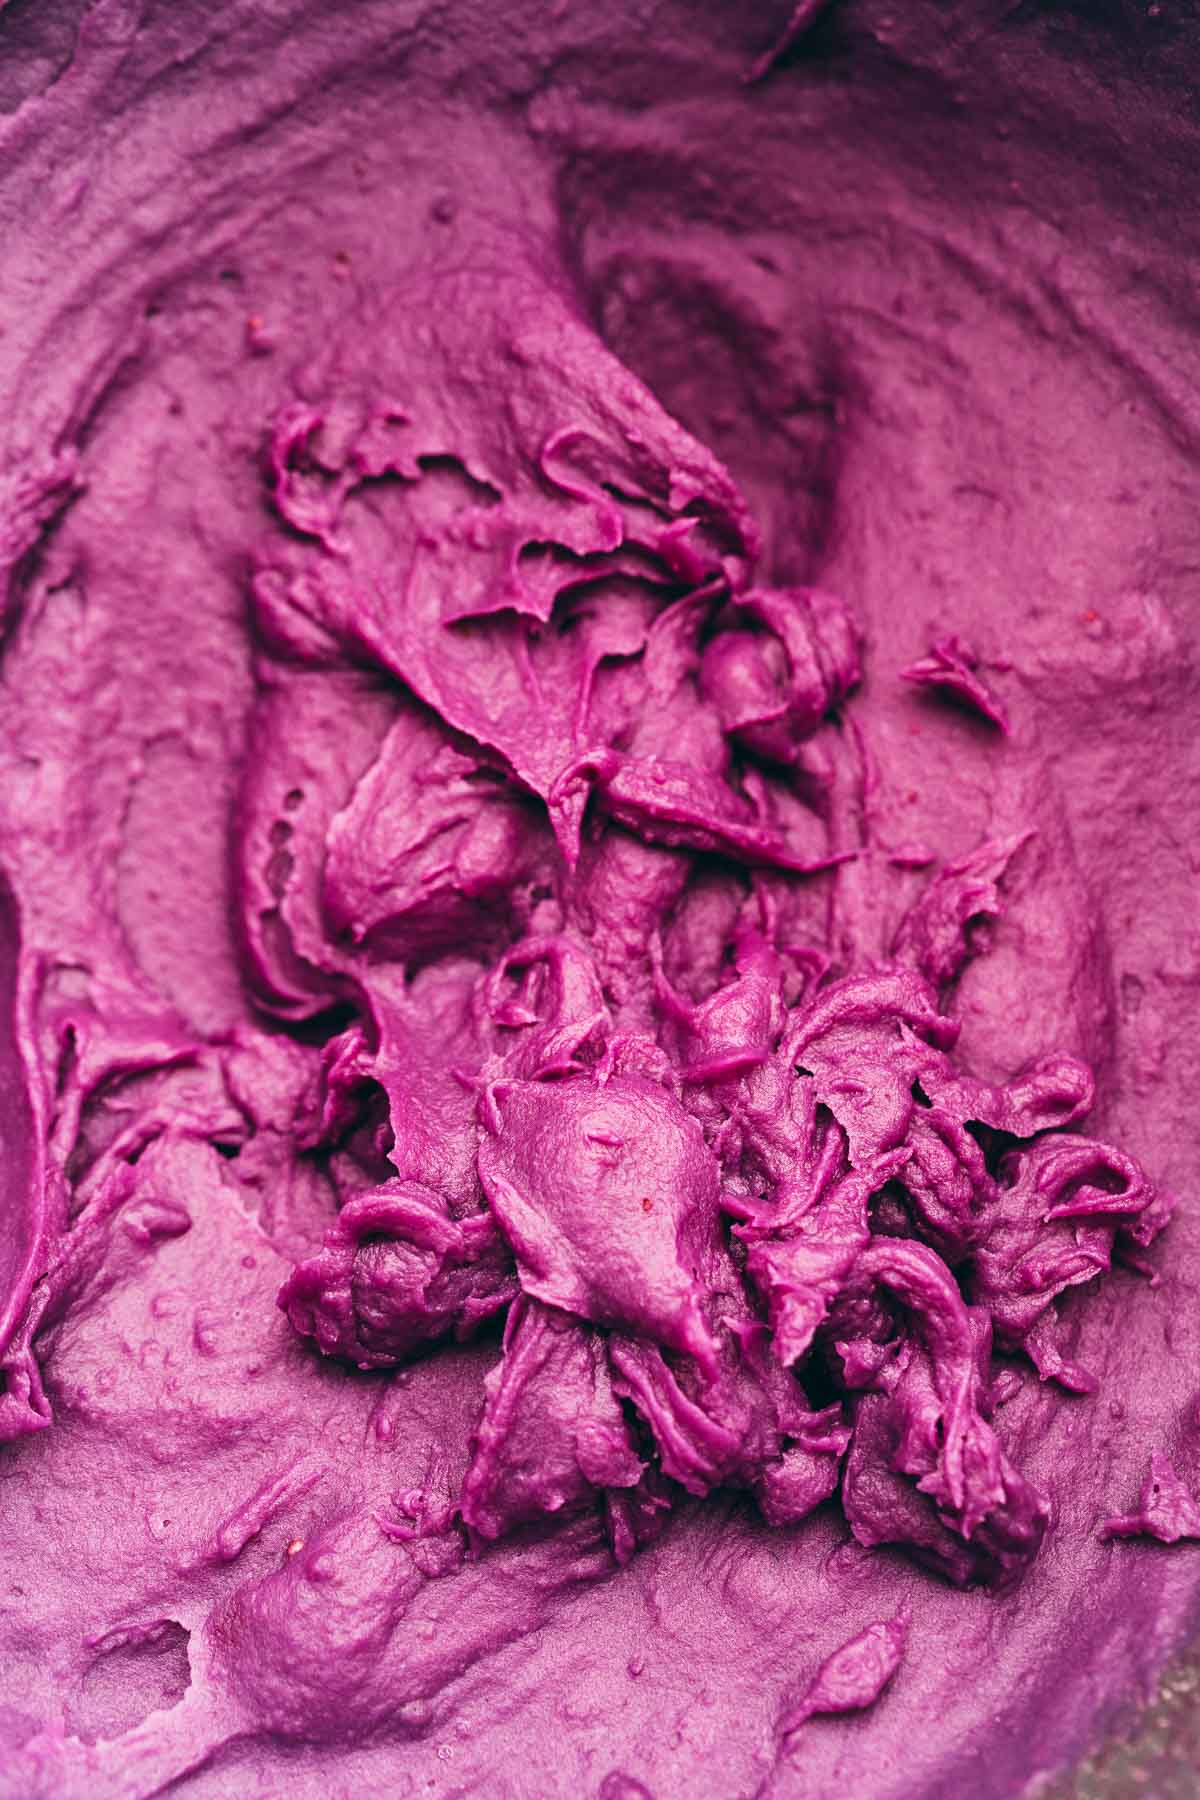 Mashed purple sweet potatoes in a bowl with purple icing on top.